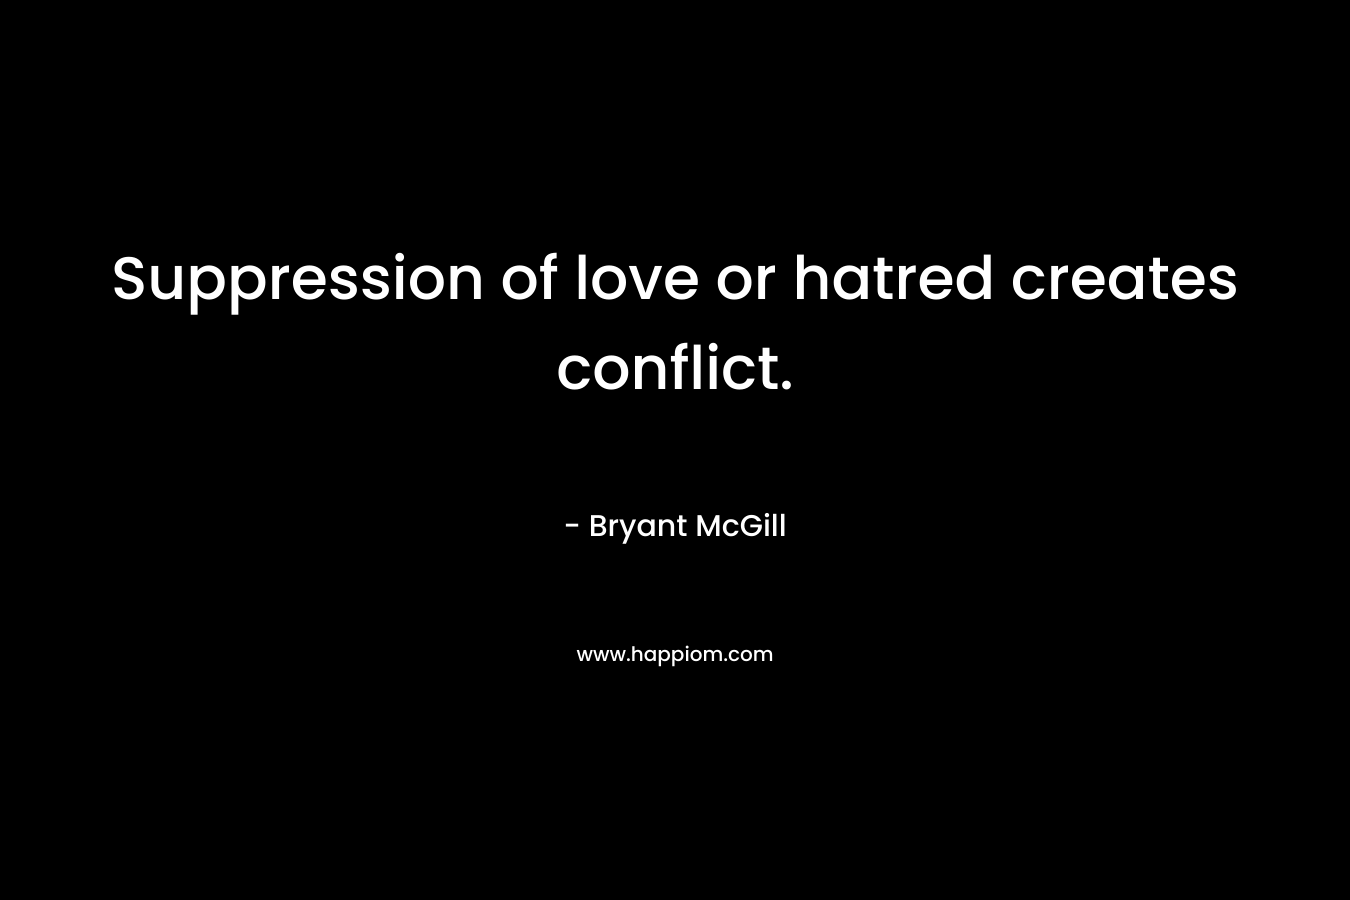 Suppression of love or hatred creates conflict. – Bryant McGill